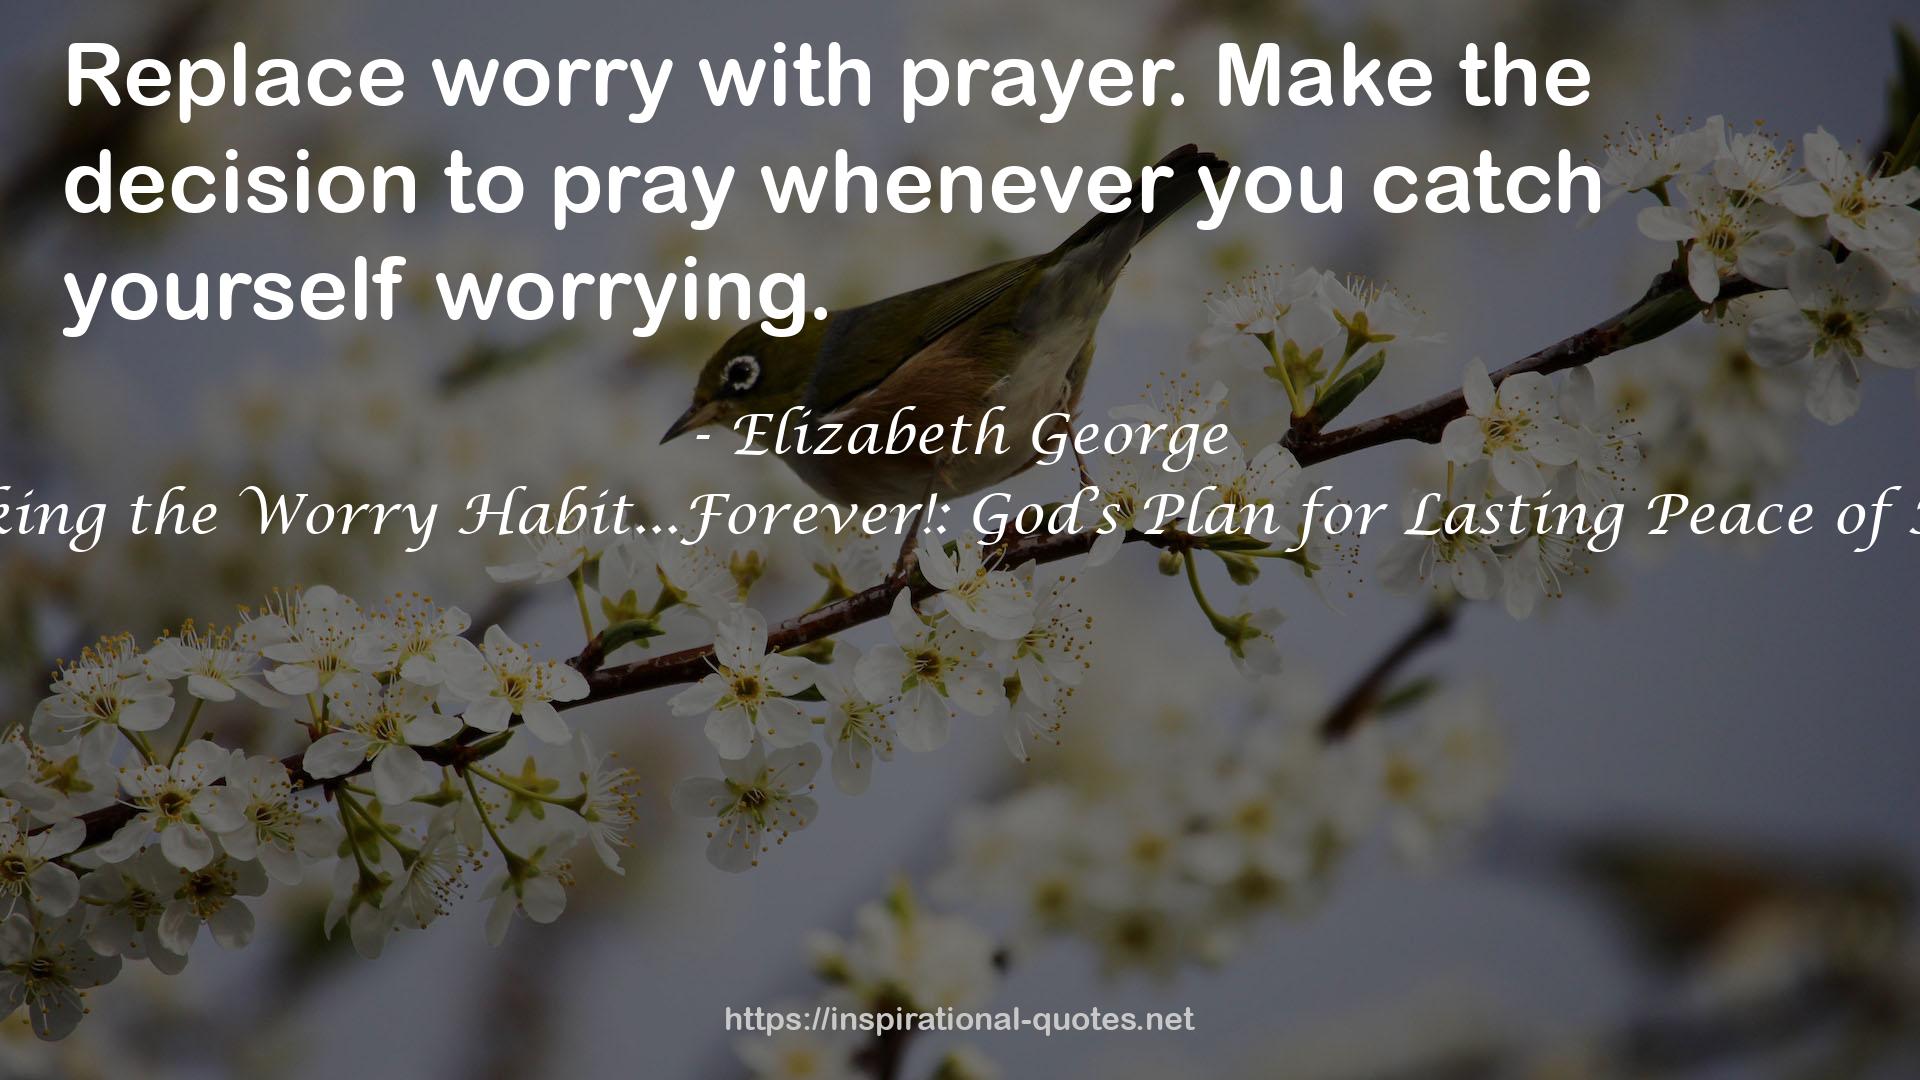 Breaking the Worry Habit...Forever!: God’s Plan for Lasting Peace of Mind QUOTES